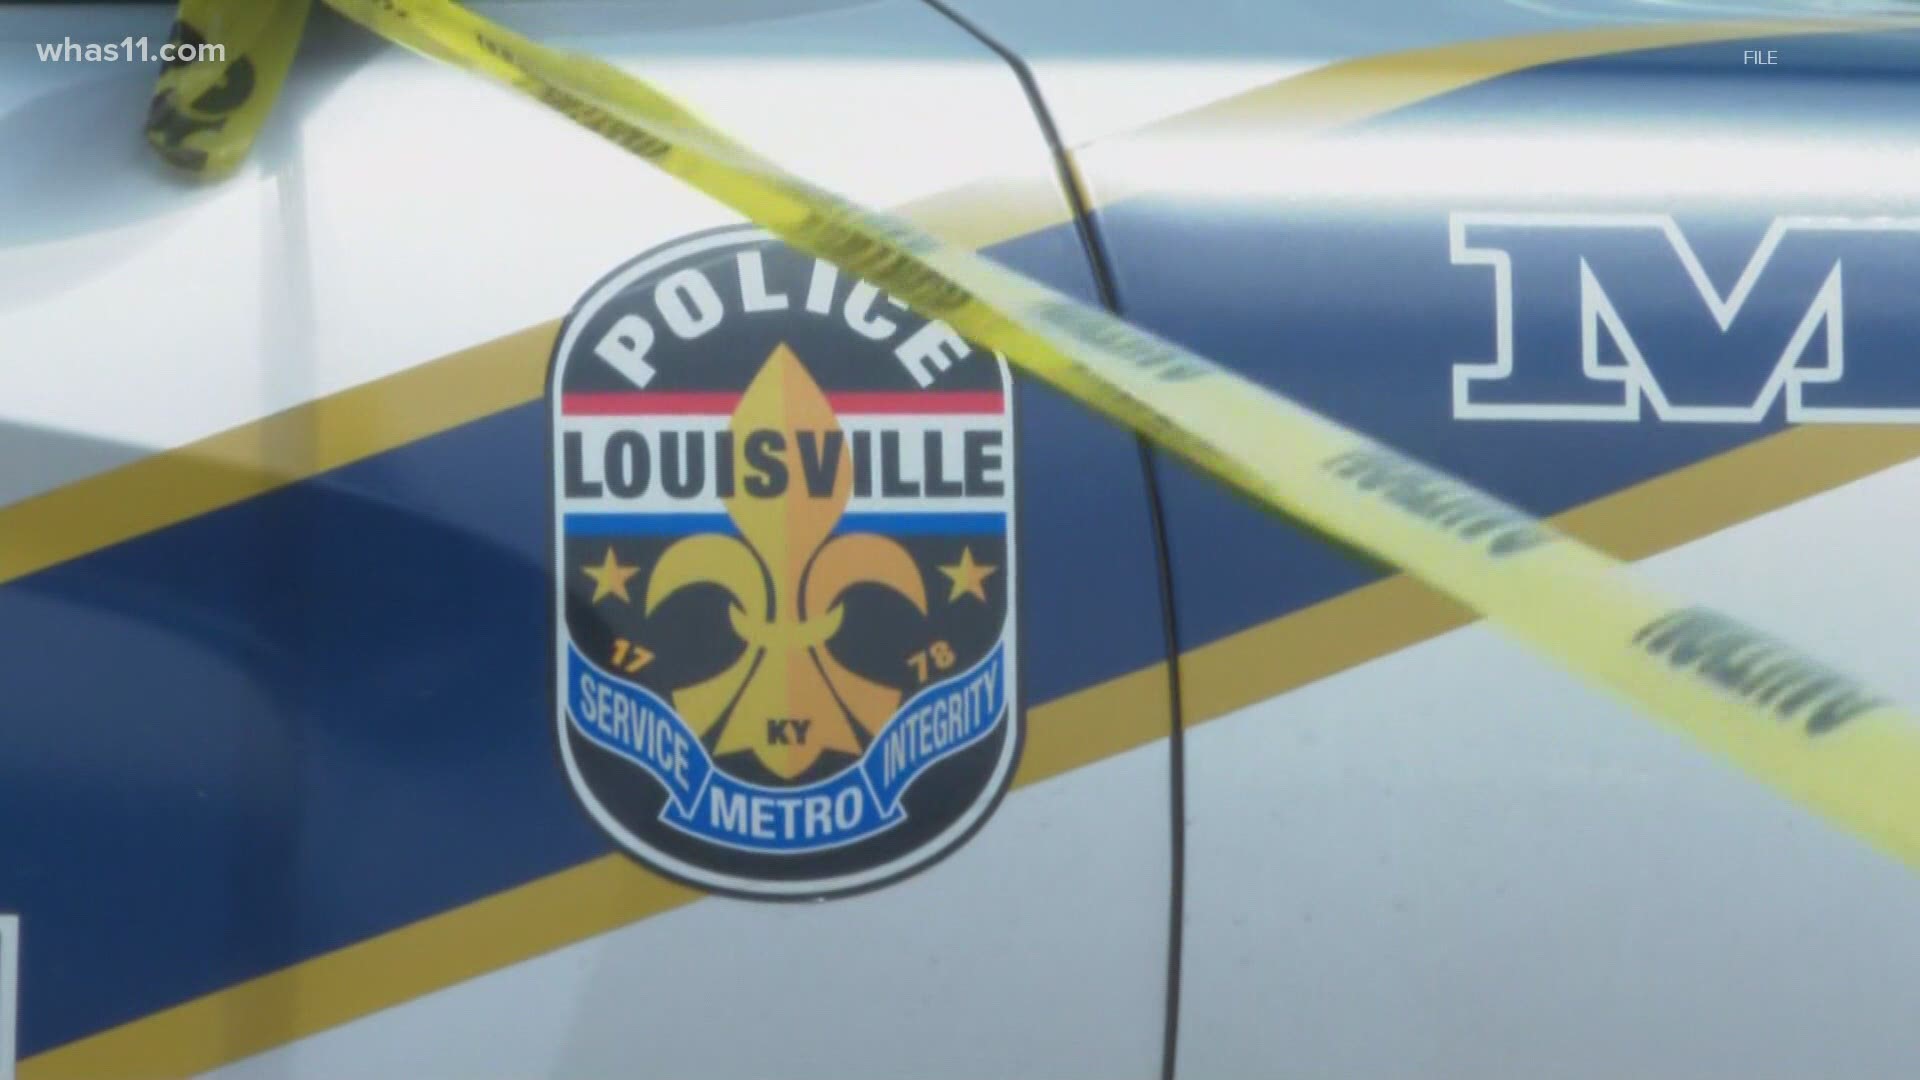 We asked LMPD what they're doing to address hate crime in our community.